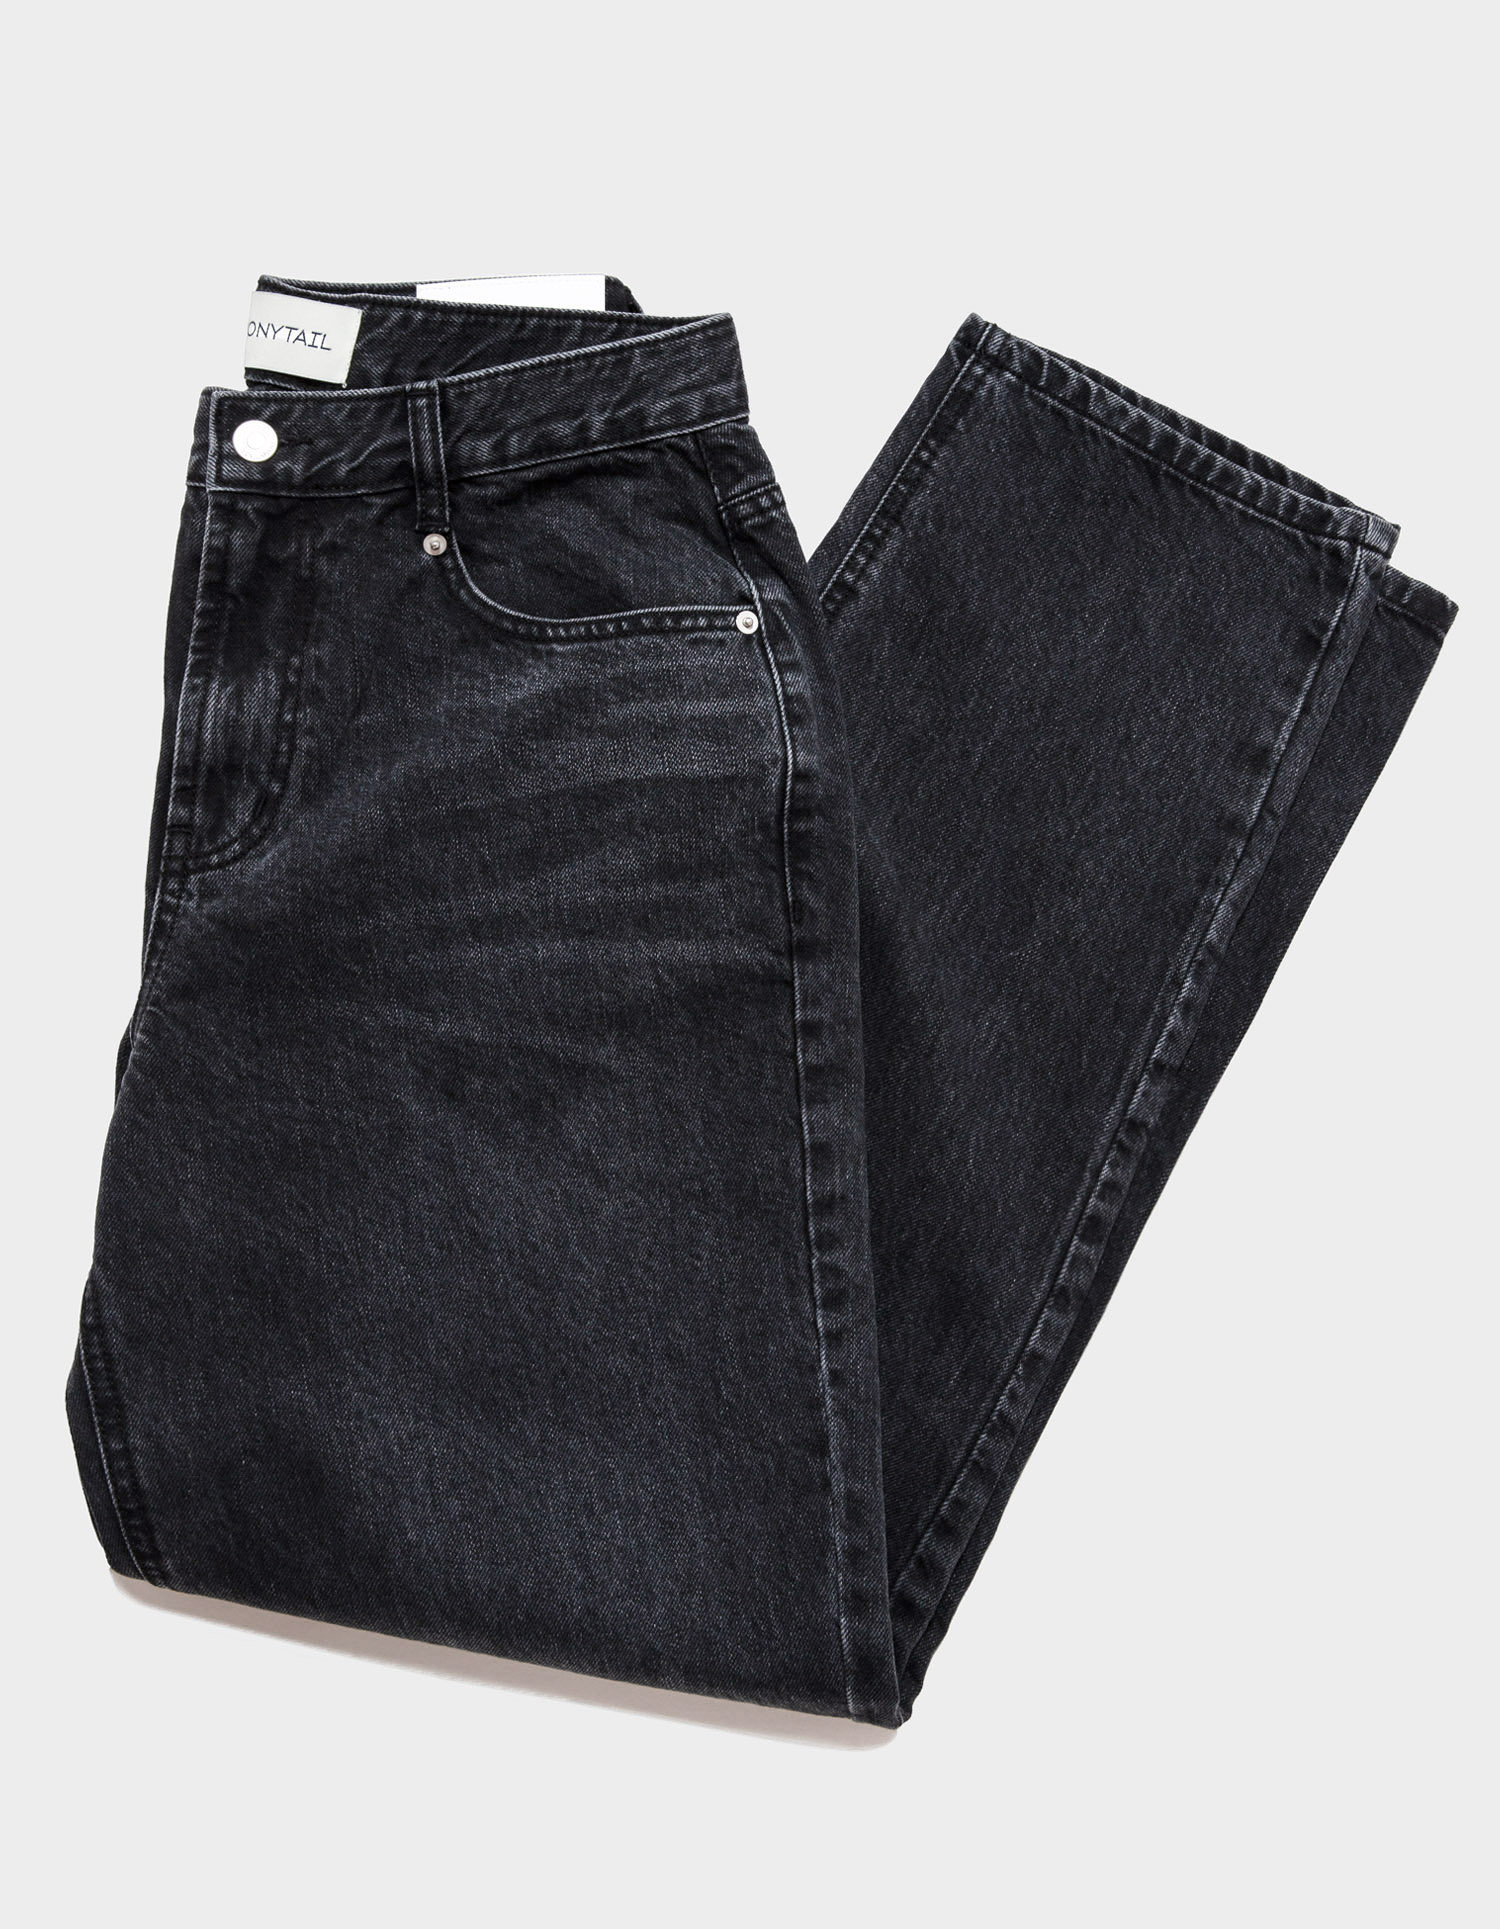 Daddy Baggy Jeans (Washed BK) - 포니테일